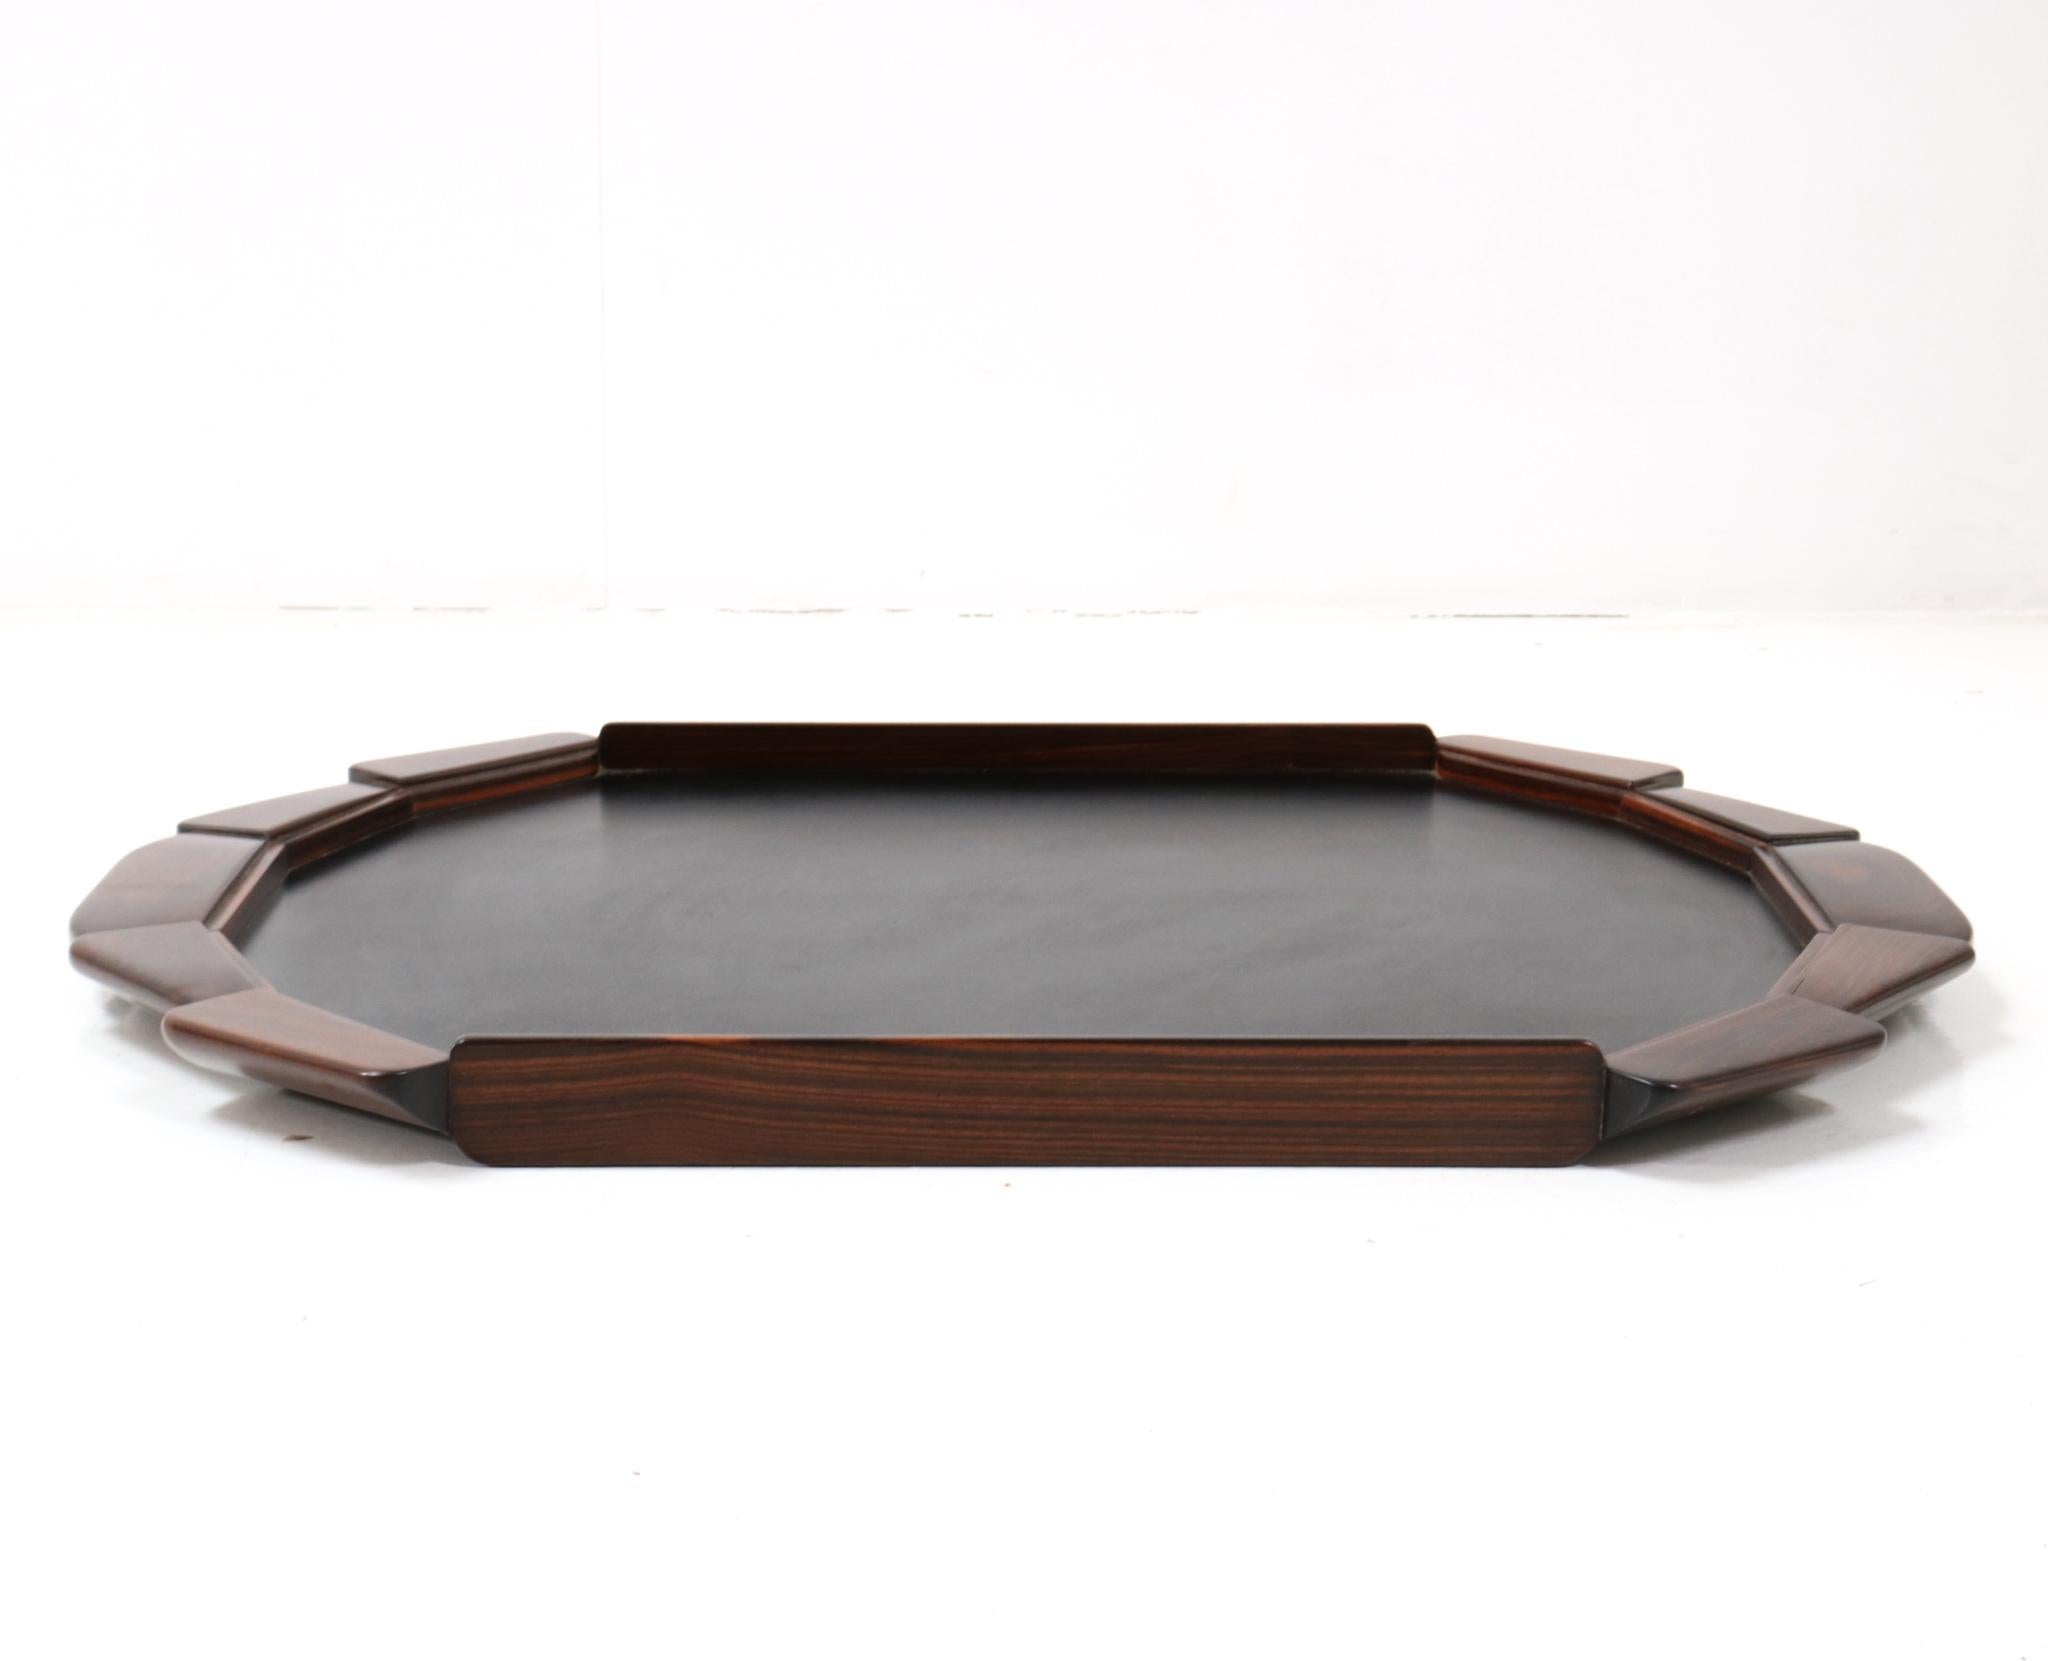 Magnificent and rare Art Deco serving tray.
Striking French design from the 1930s.
Solid macassar ebony frame with faux leather top.
This large and wonderful Art Deco serving tray is in very good condition with
minor wear consistent with age and